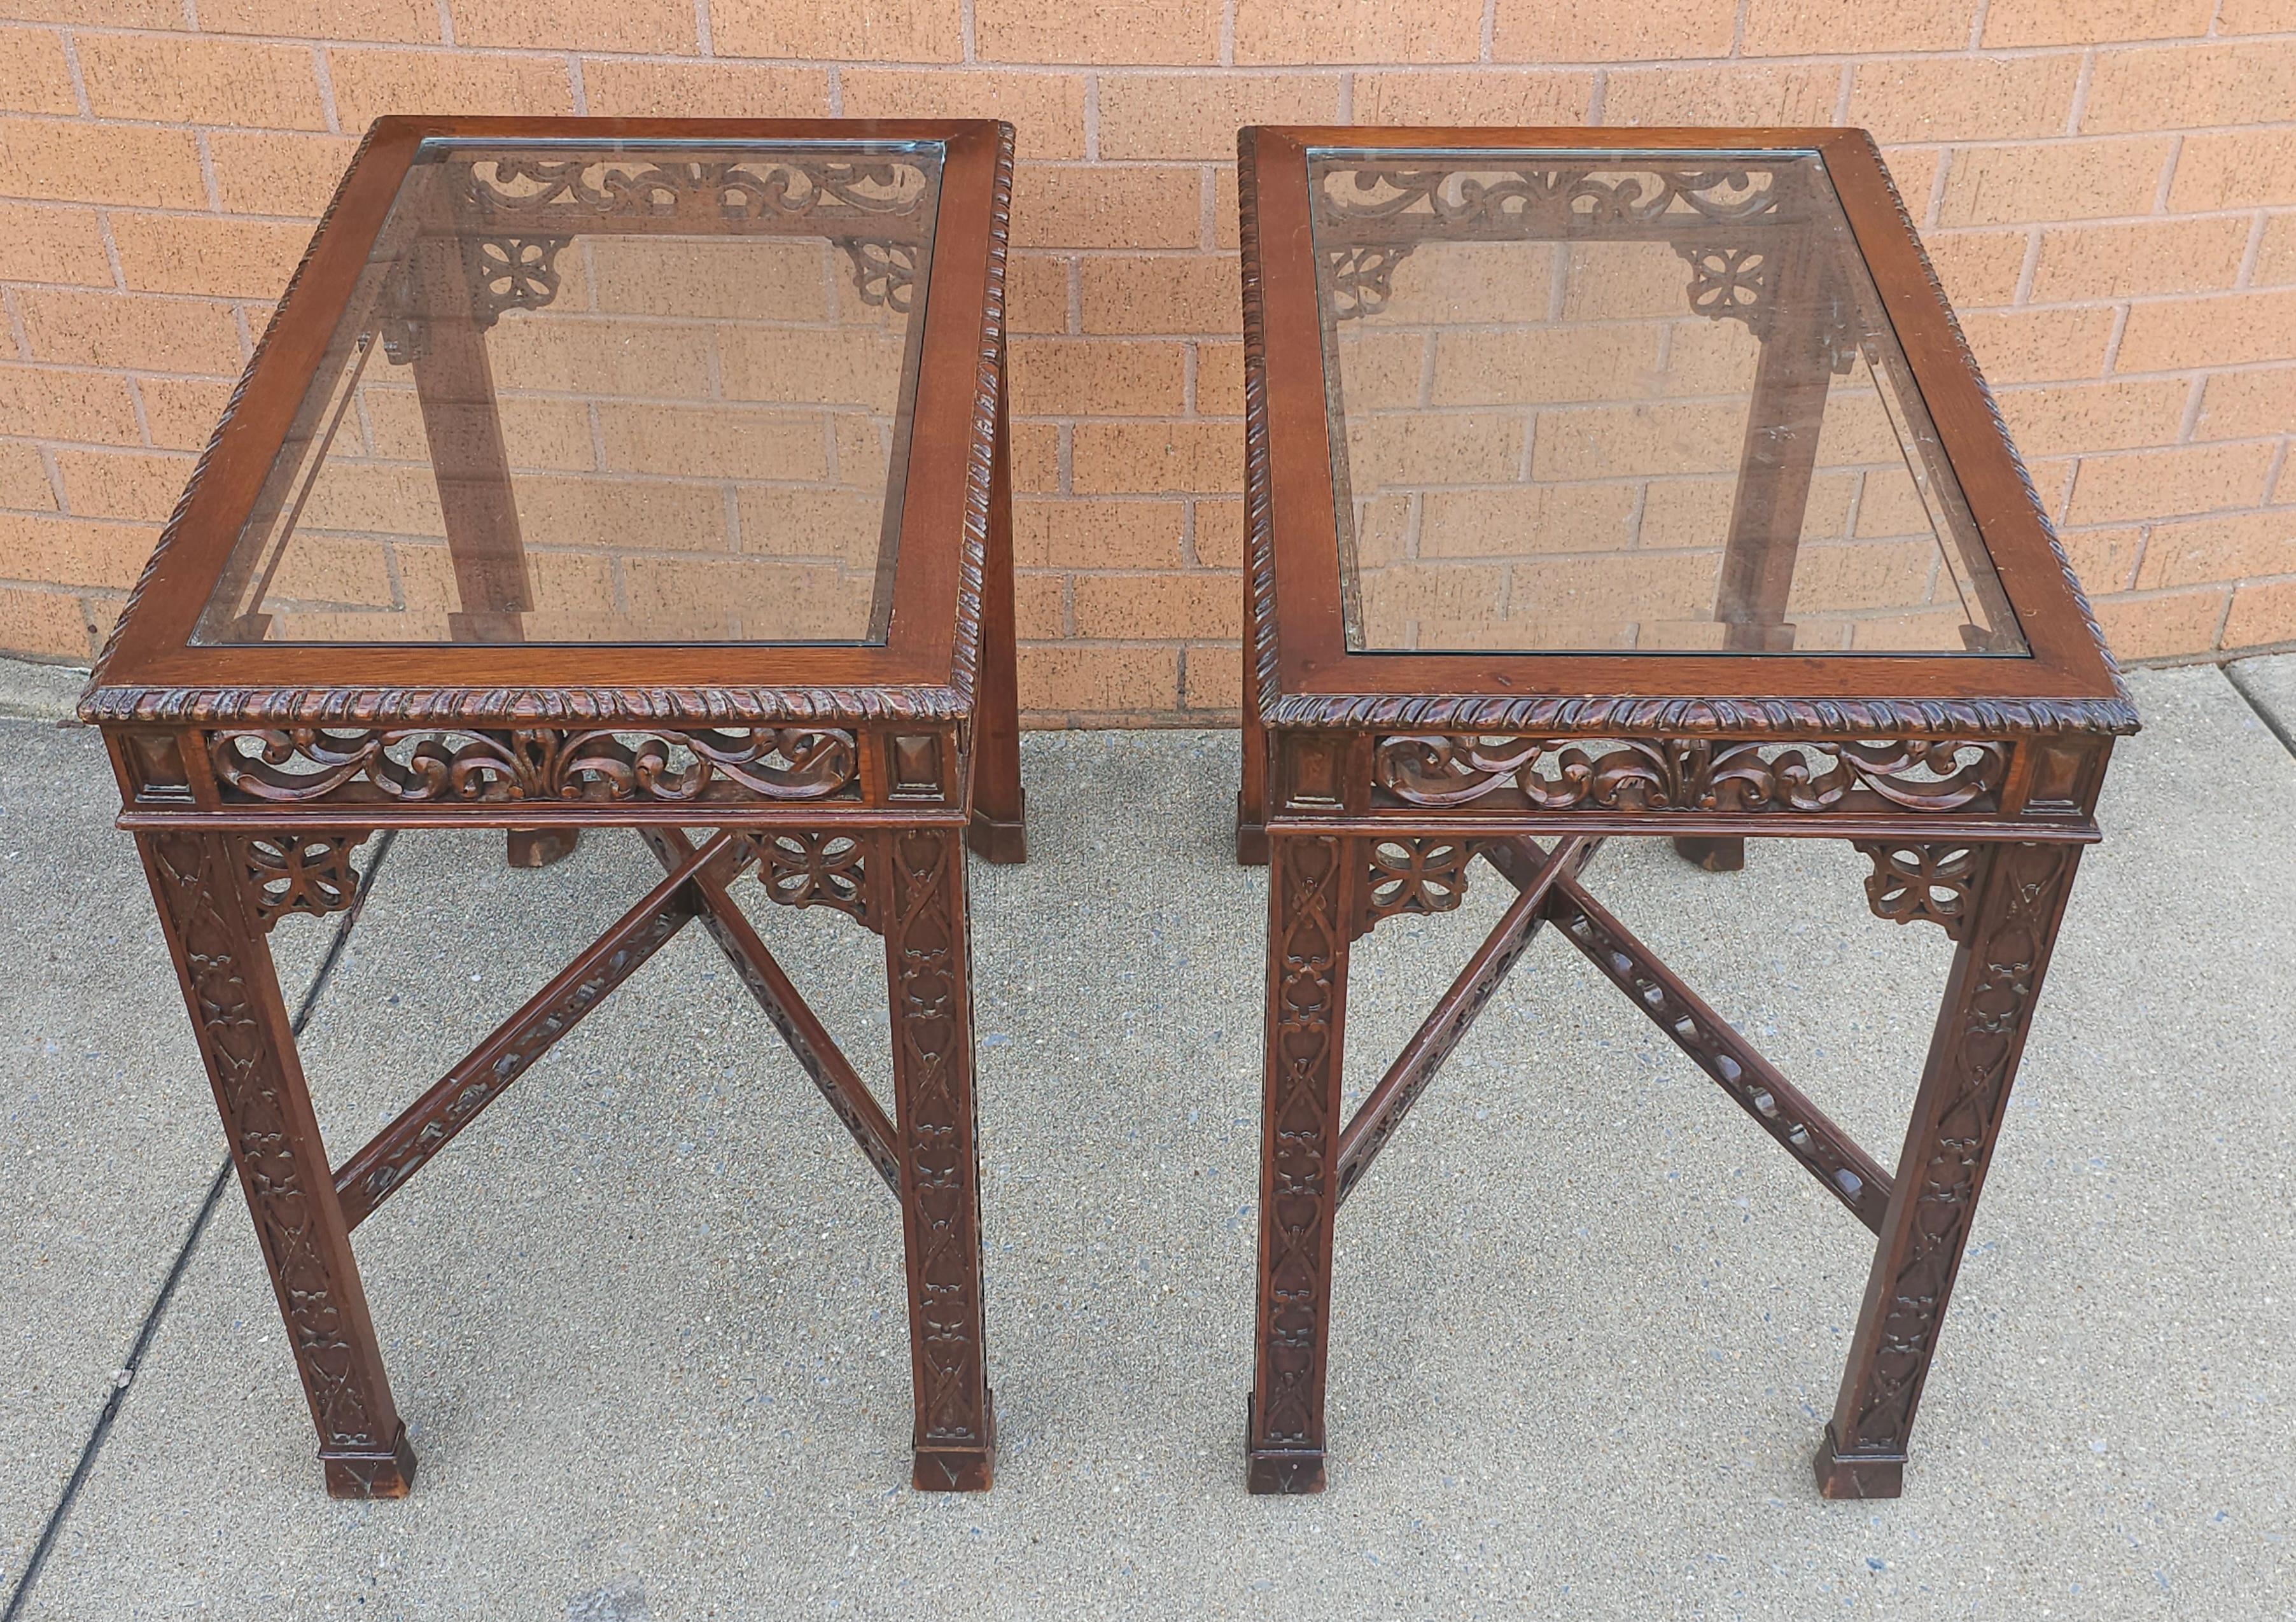 Pair Of Chinese Chippendale Style Fretwork and Glass Inset Mahogany Side Tables In Good Condition For Sale In Germantown, MD